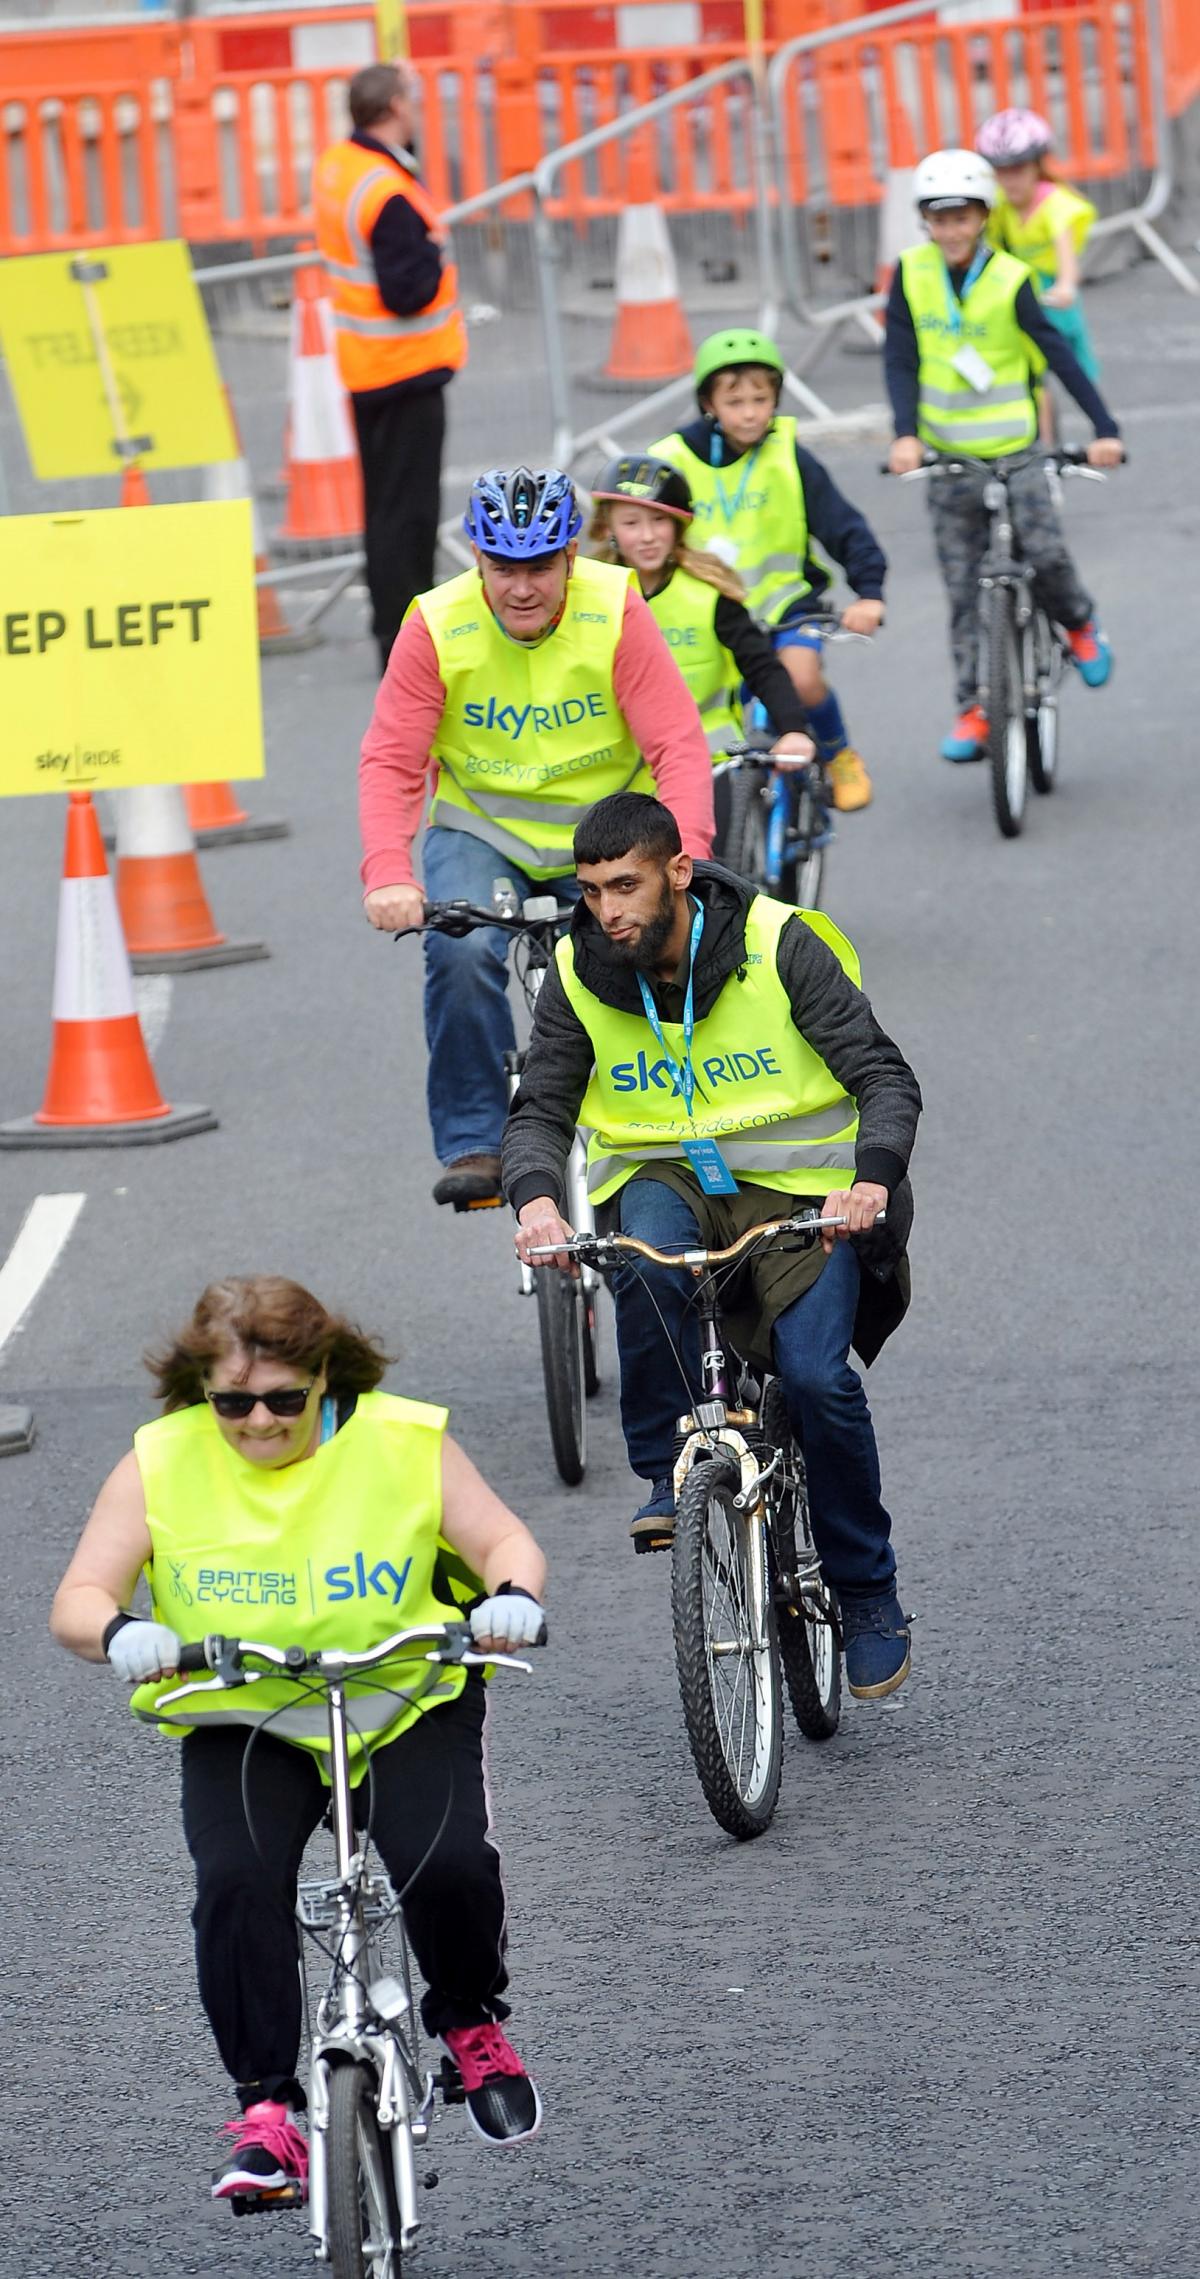 A selection of images taken at the Bradford Sky Ride 2015